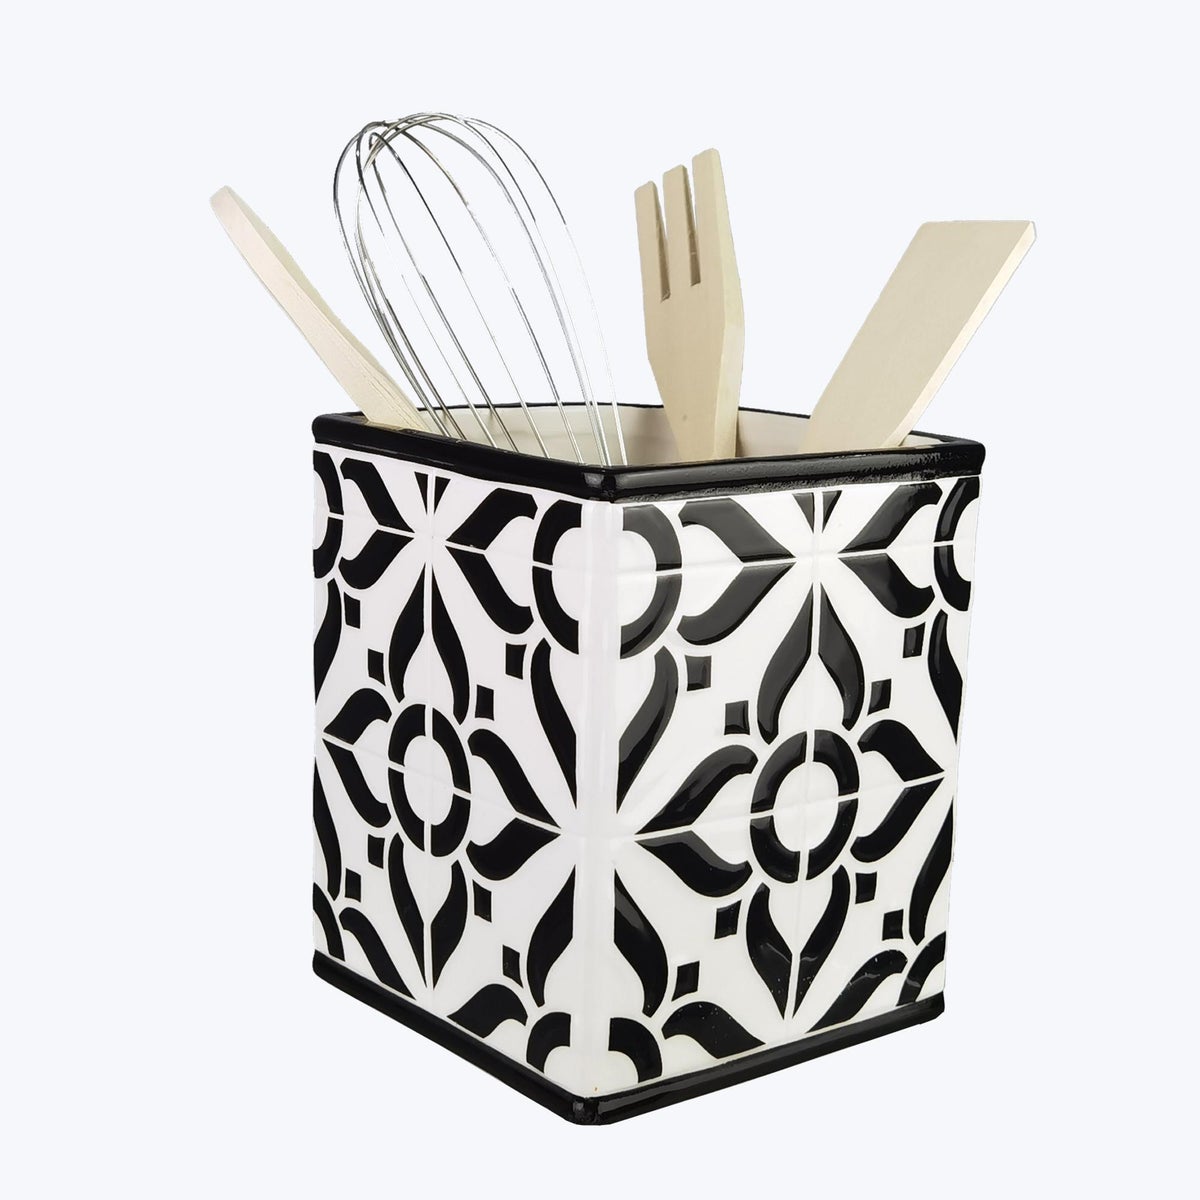 Ceramic Moroccan Tile Design Tool Holder with Tools